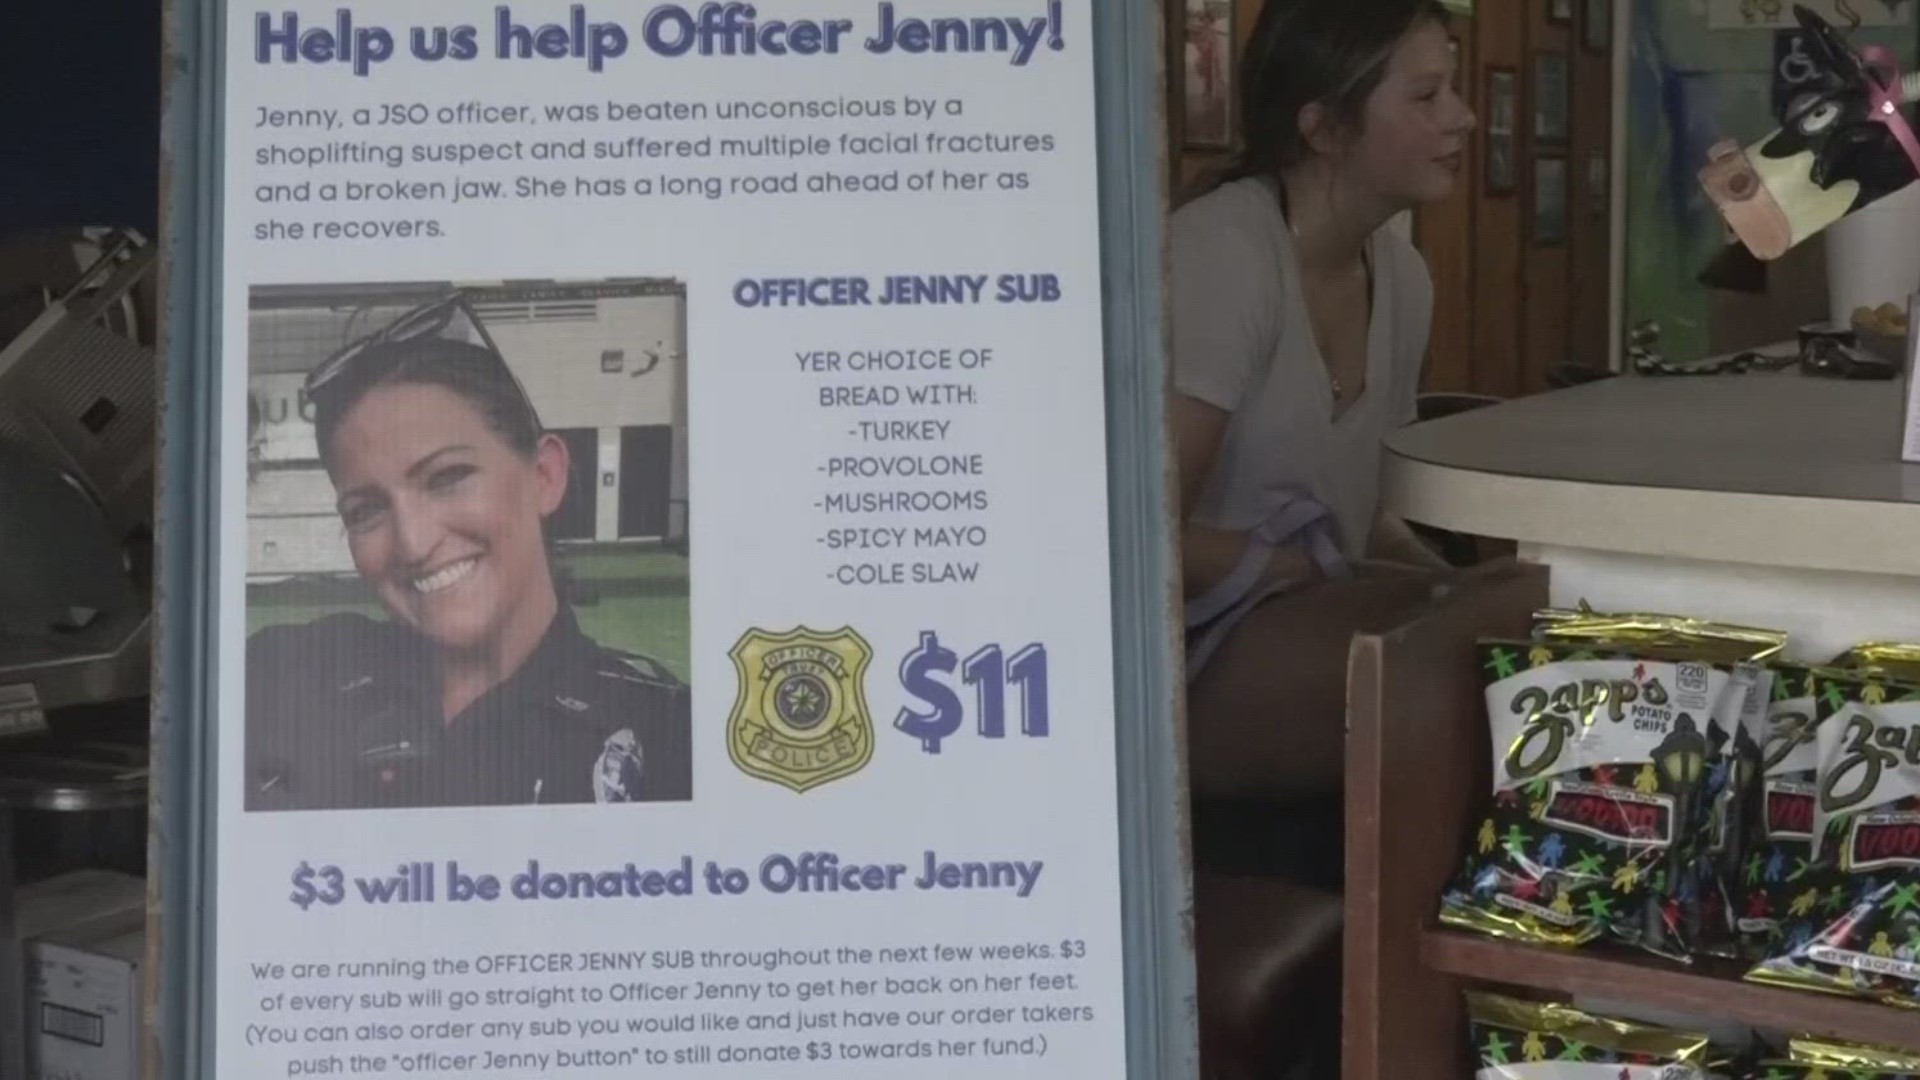 Officer Jenny was beaten unconscious by an accused shoplifting suspect.